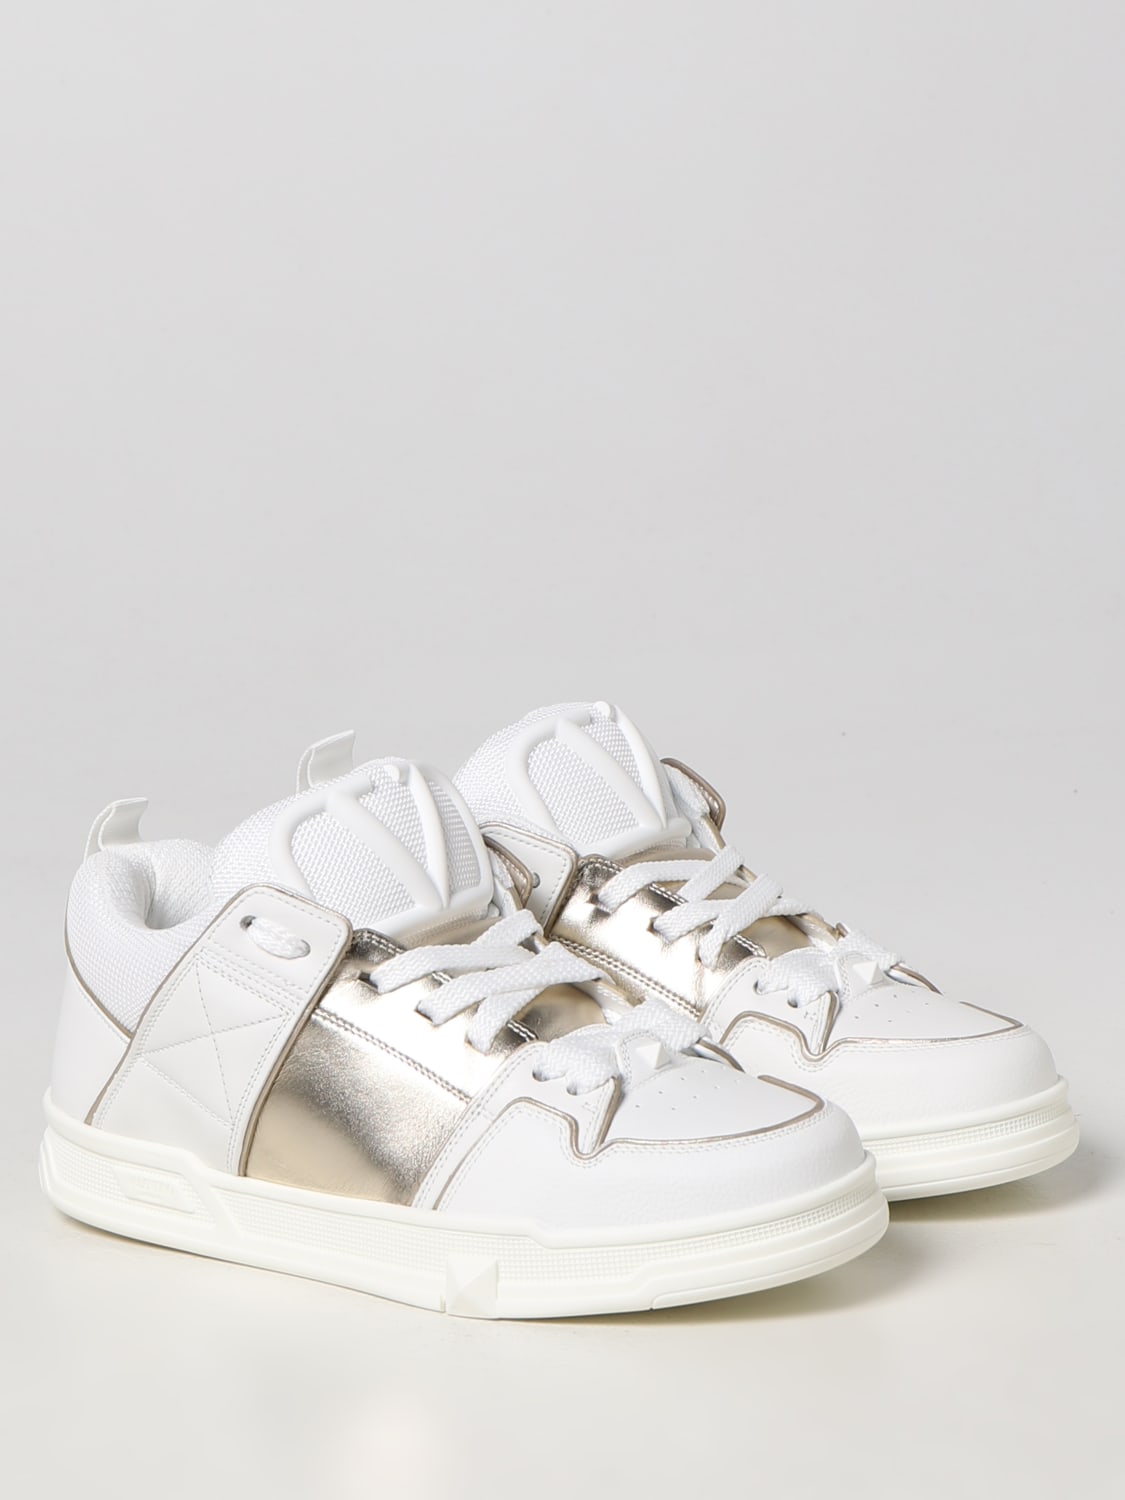 Samtykke forord Betinget Valentino Garavani Outlet: Open Skate sneakers in leather and mesh - White  | Valentino Garavani sneakers 1W2S0FB1YEW online at GIGLIO.COM